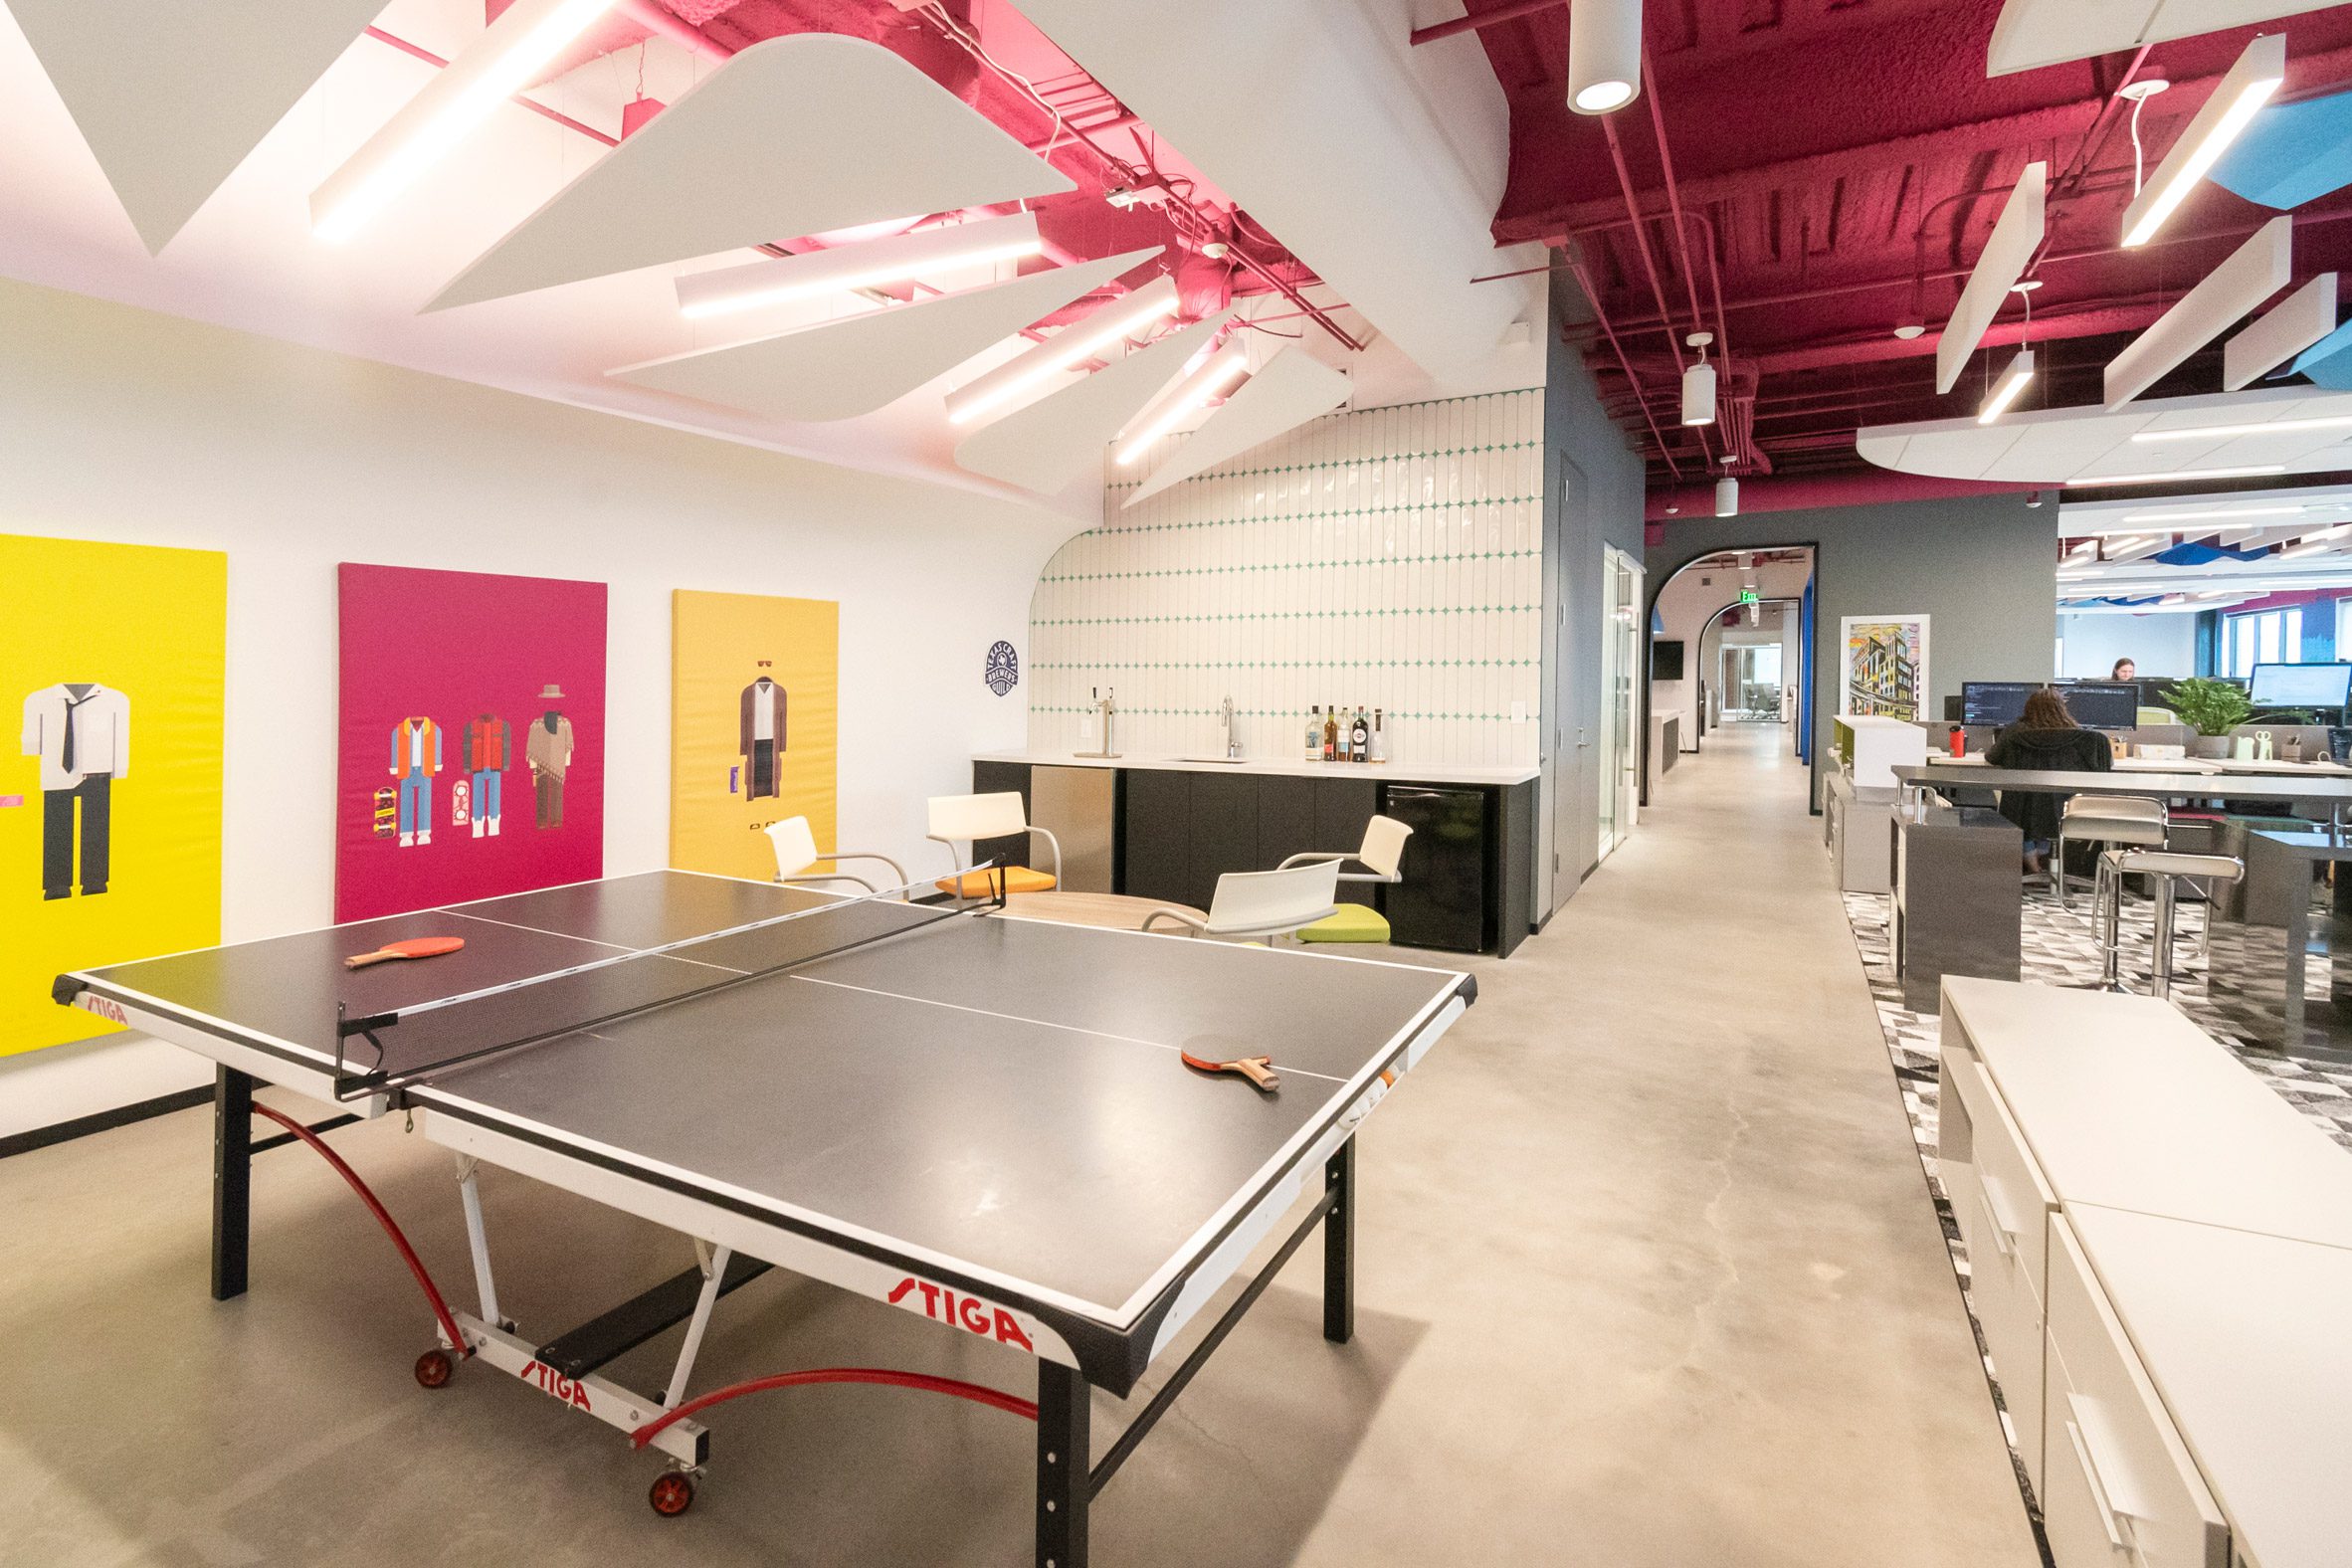 Table tennis table in Method Architecture's studio